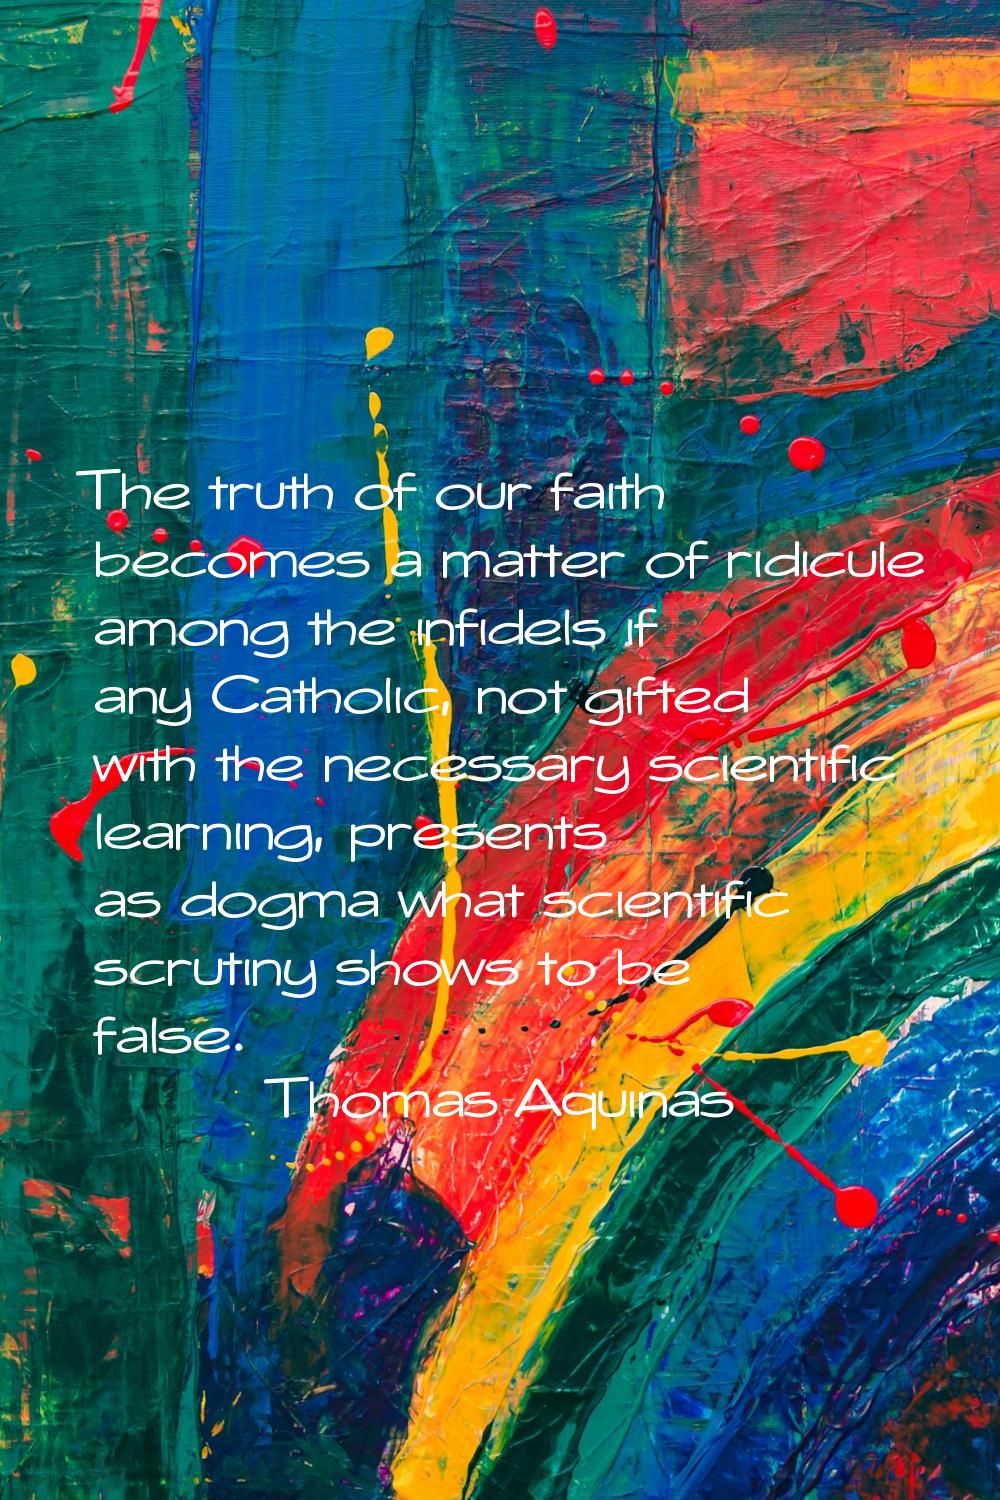 The truth of our faith becomes a matter of ridicule among the infidels if any Catholic, not gifted 